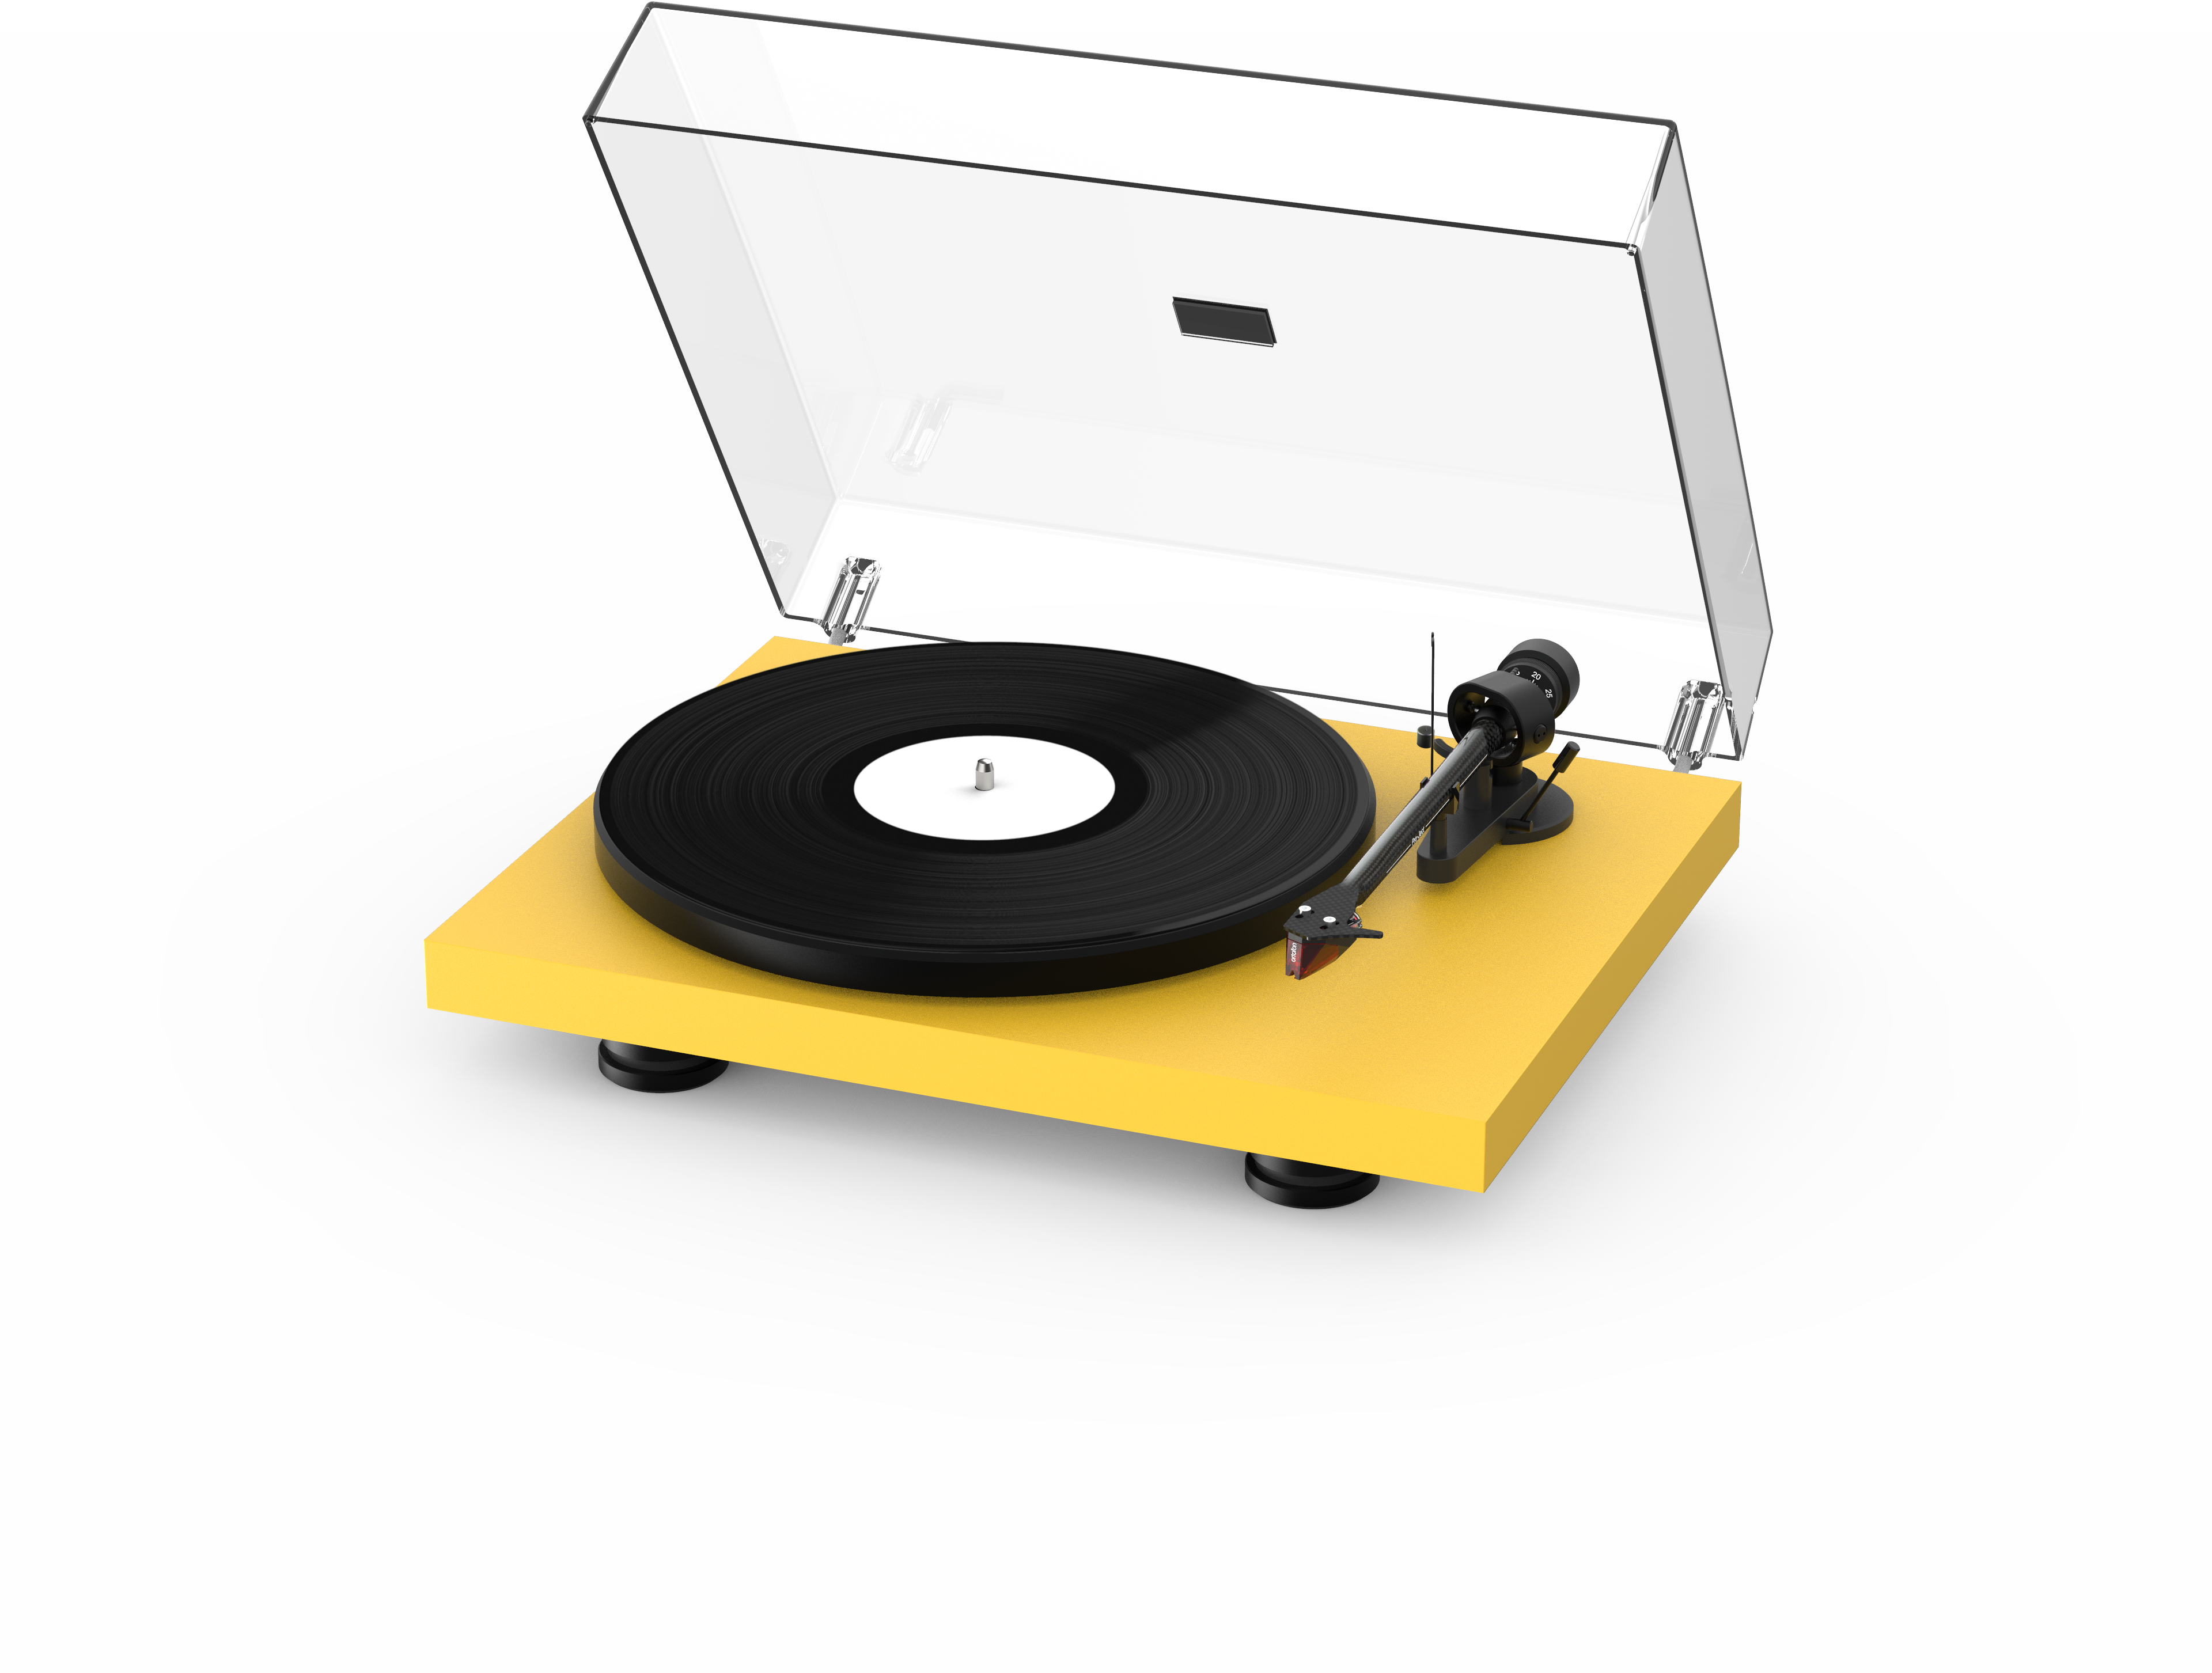 Debut Carbon Evo Satin Golden Yellow LP Dustcover Shadow Interdyn Announce Release Of Pro Ject Debut Carbon Evo Turntable